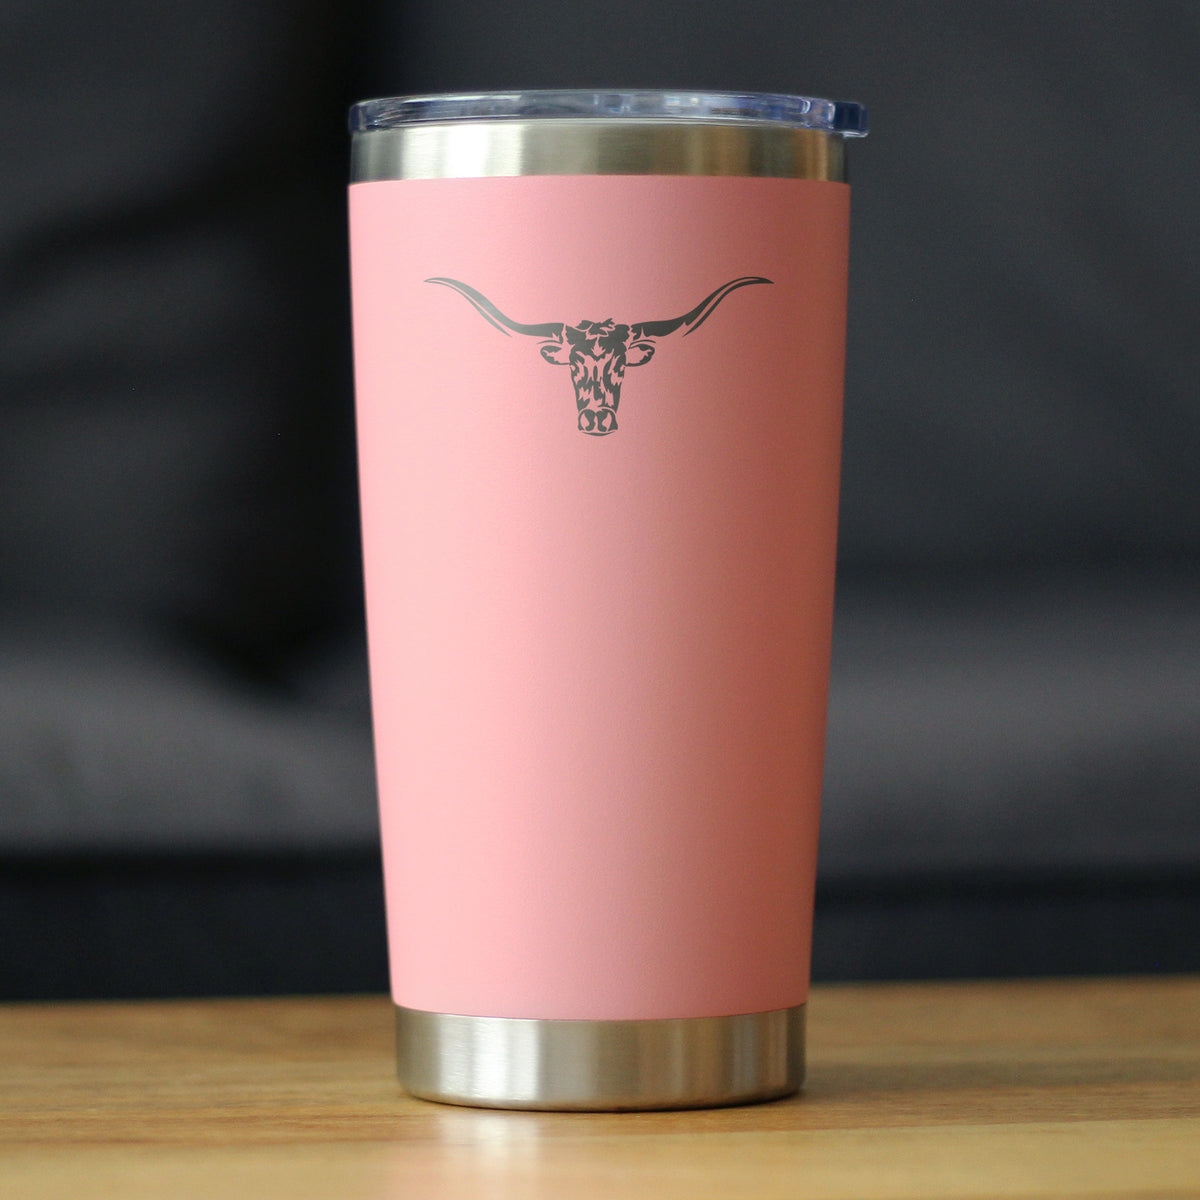 Longhorn - Insulated Coffee Tumbler Cup with Sliding Lid - Stainless Steel Insulated Mug - Western Themed Farm Decor and Gifts for Texan Ranchers